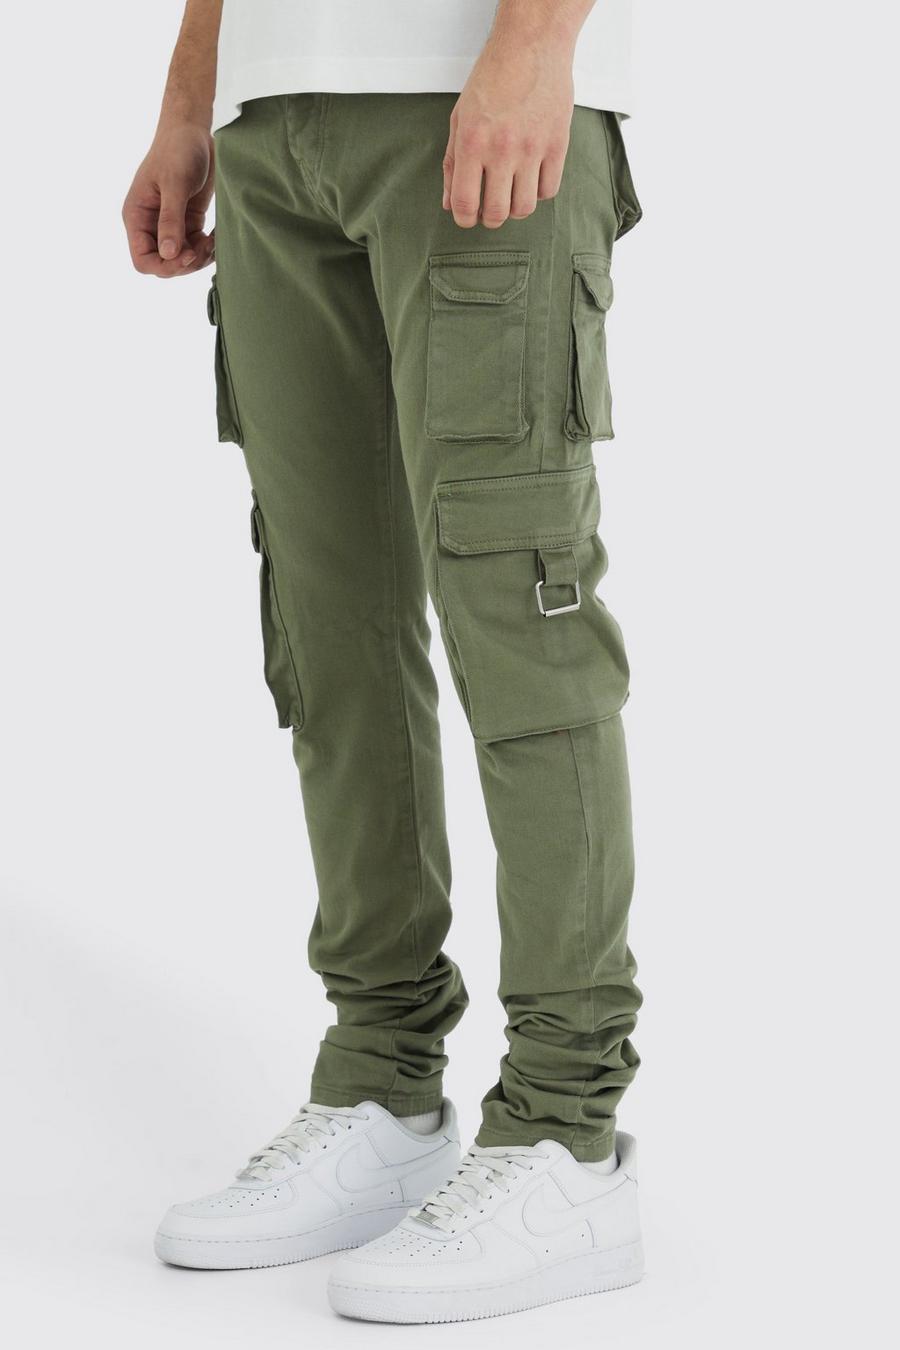 Olive Tall Stacked Skinny Fit Cargo Broek Met Tailleband